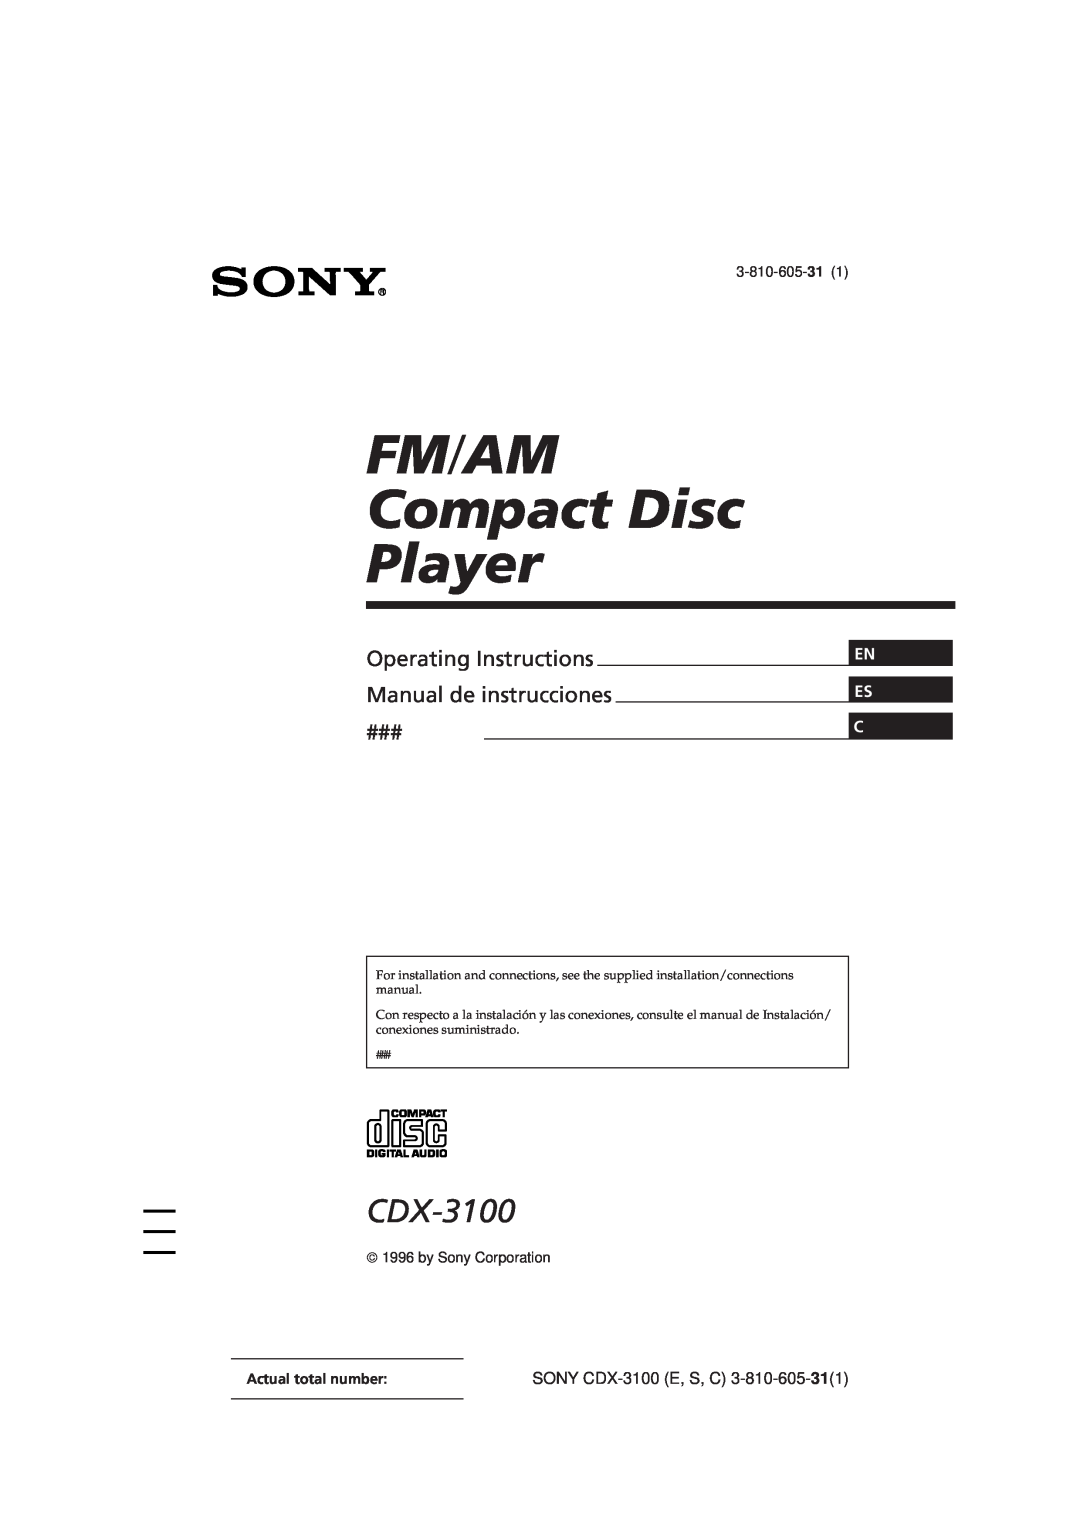 Sony Model CDX-3100 manual En Es C, 3-810-605-31, by Sony Corporation, SONY CDX-3100E, S, C, FM/AM Compact Disc Player 